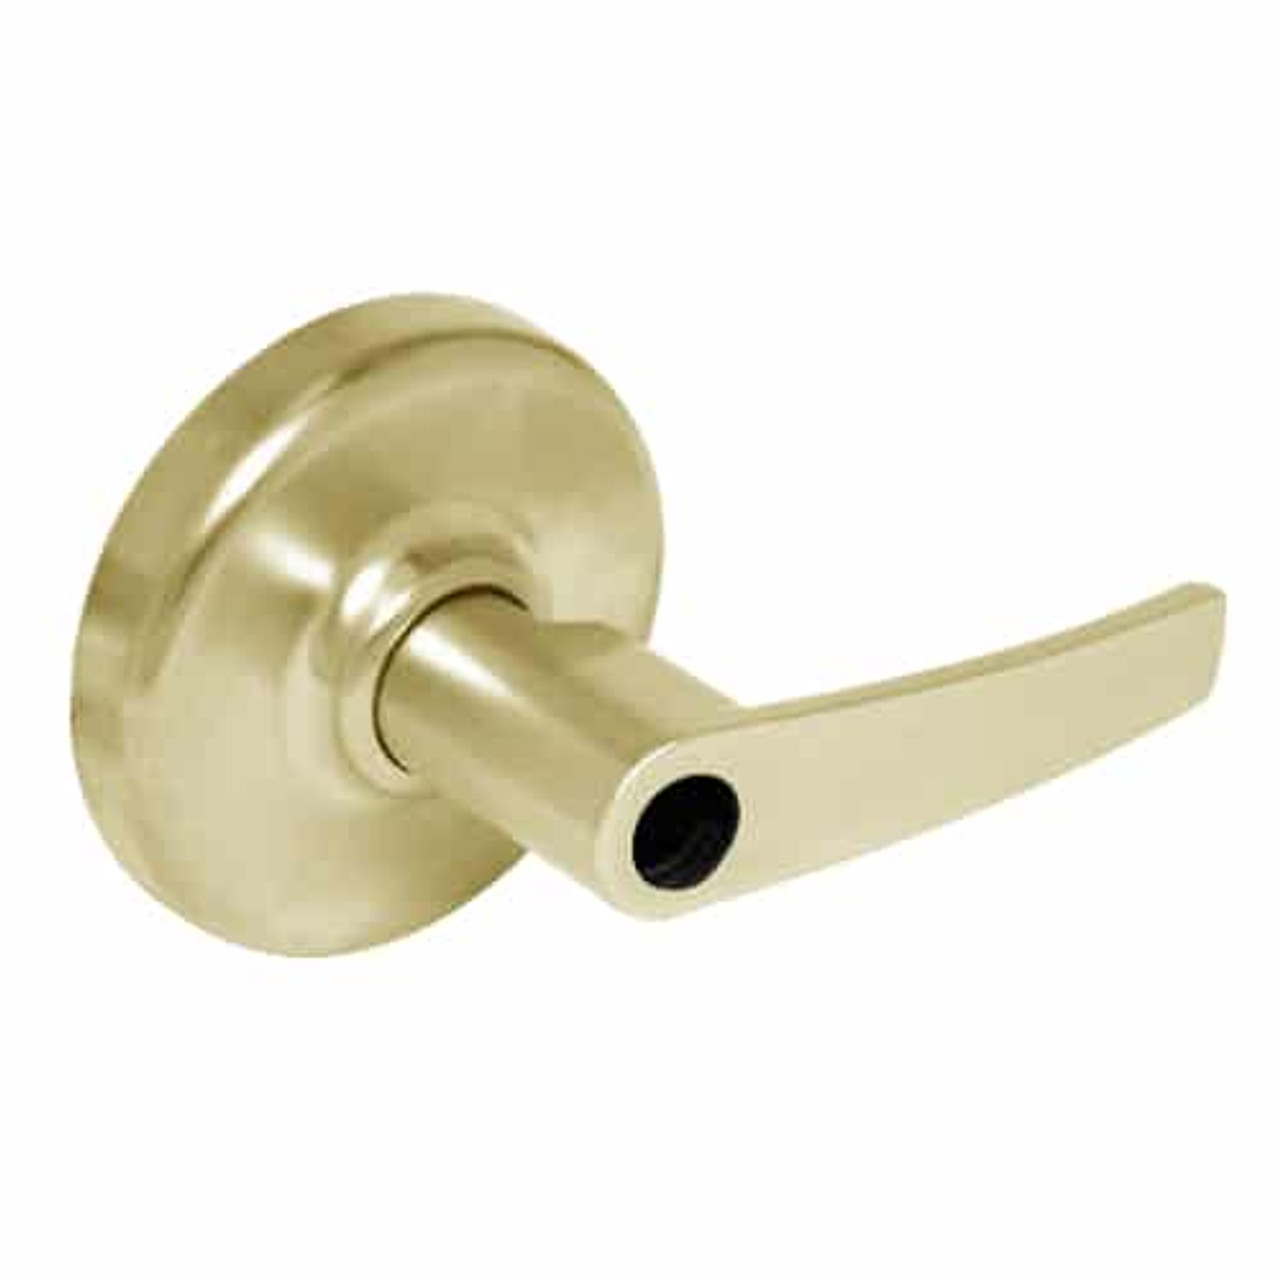 CL3582-AZD-606-LC Corbin CL3500 Series Heavy Duty Less Cylinder Store Door Cylindrical Locksets with Armstrong Lever in Satin Brass Finish